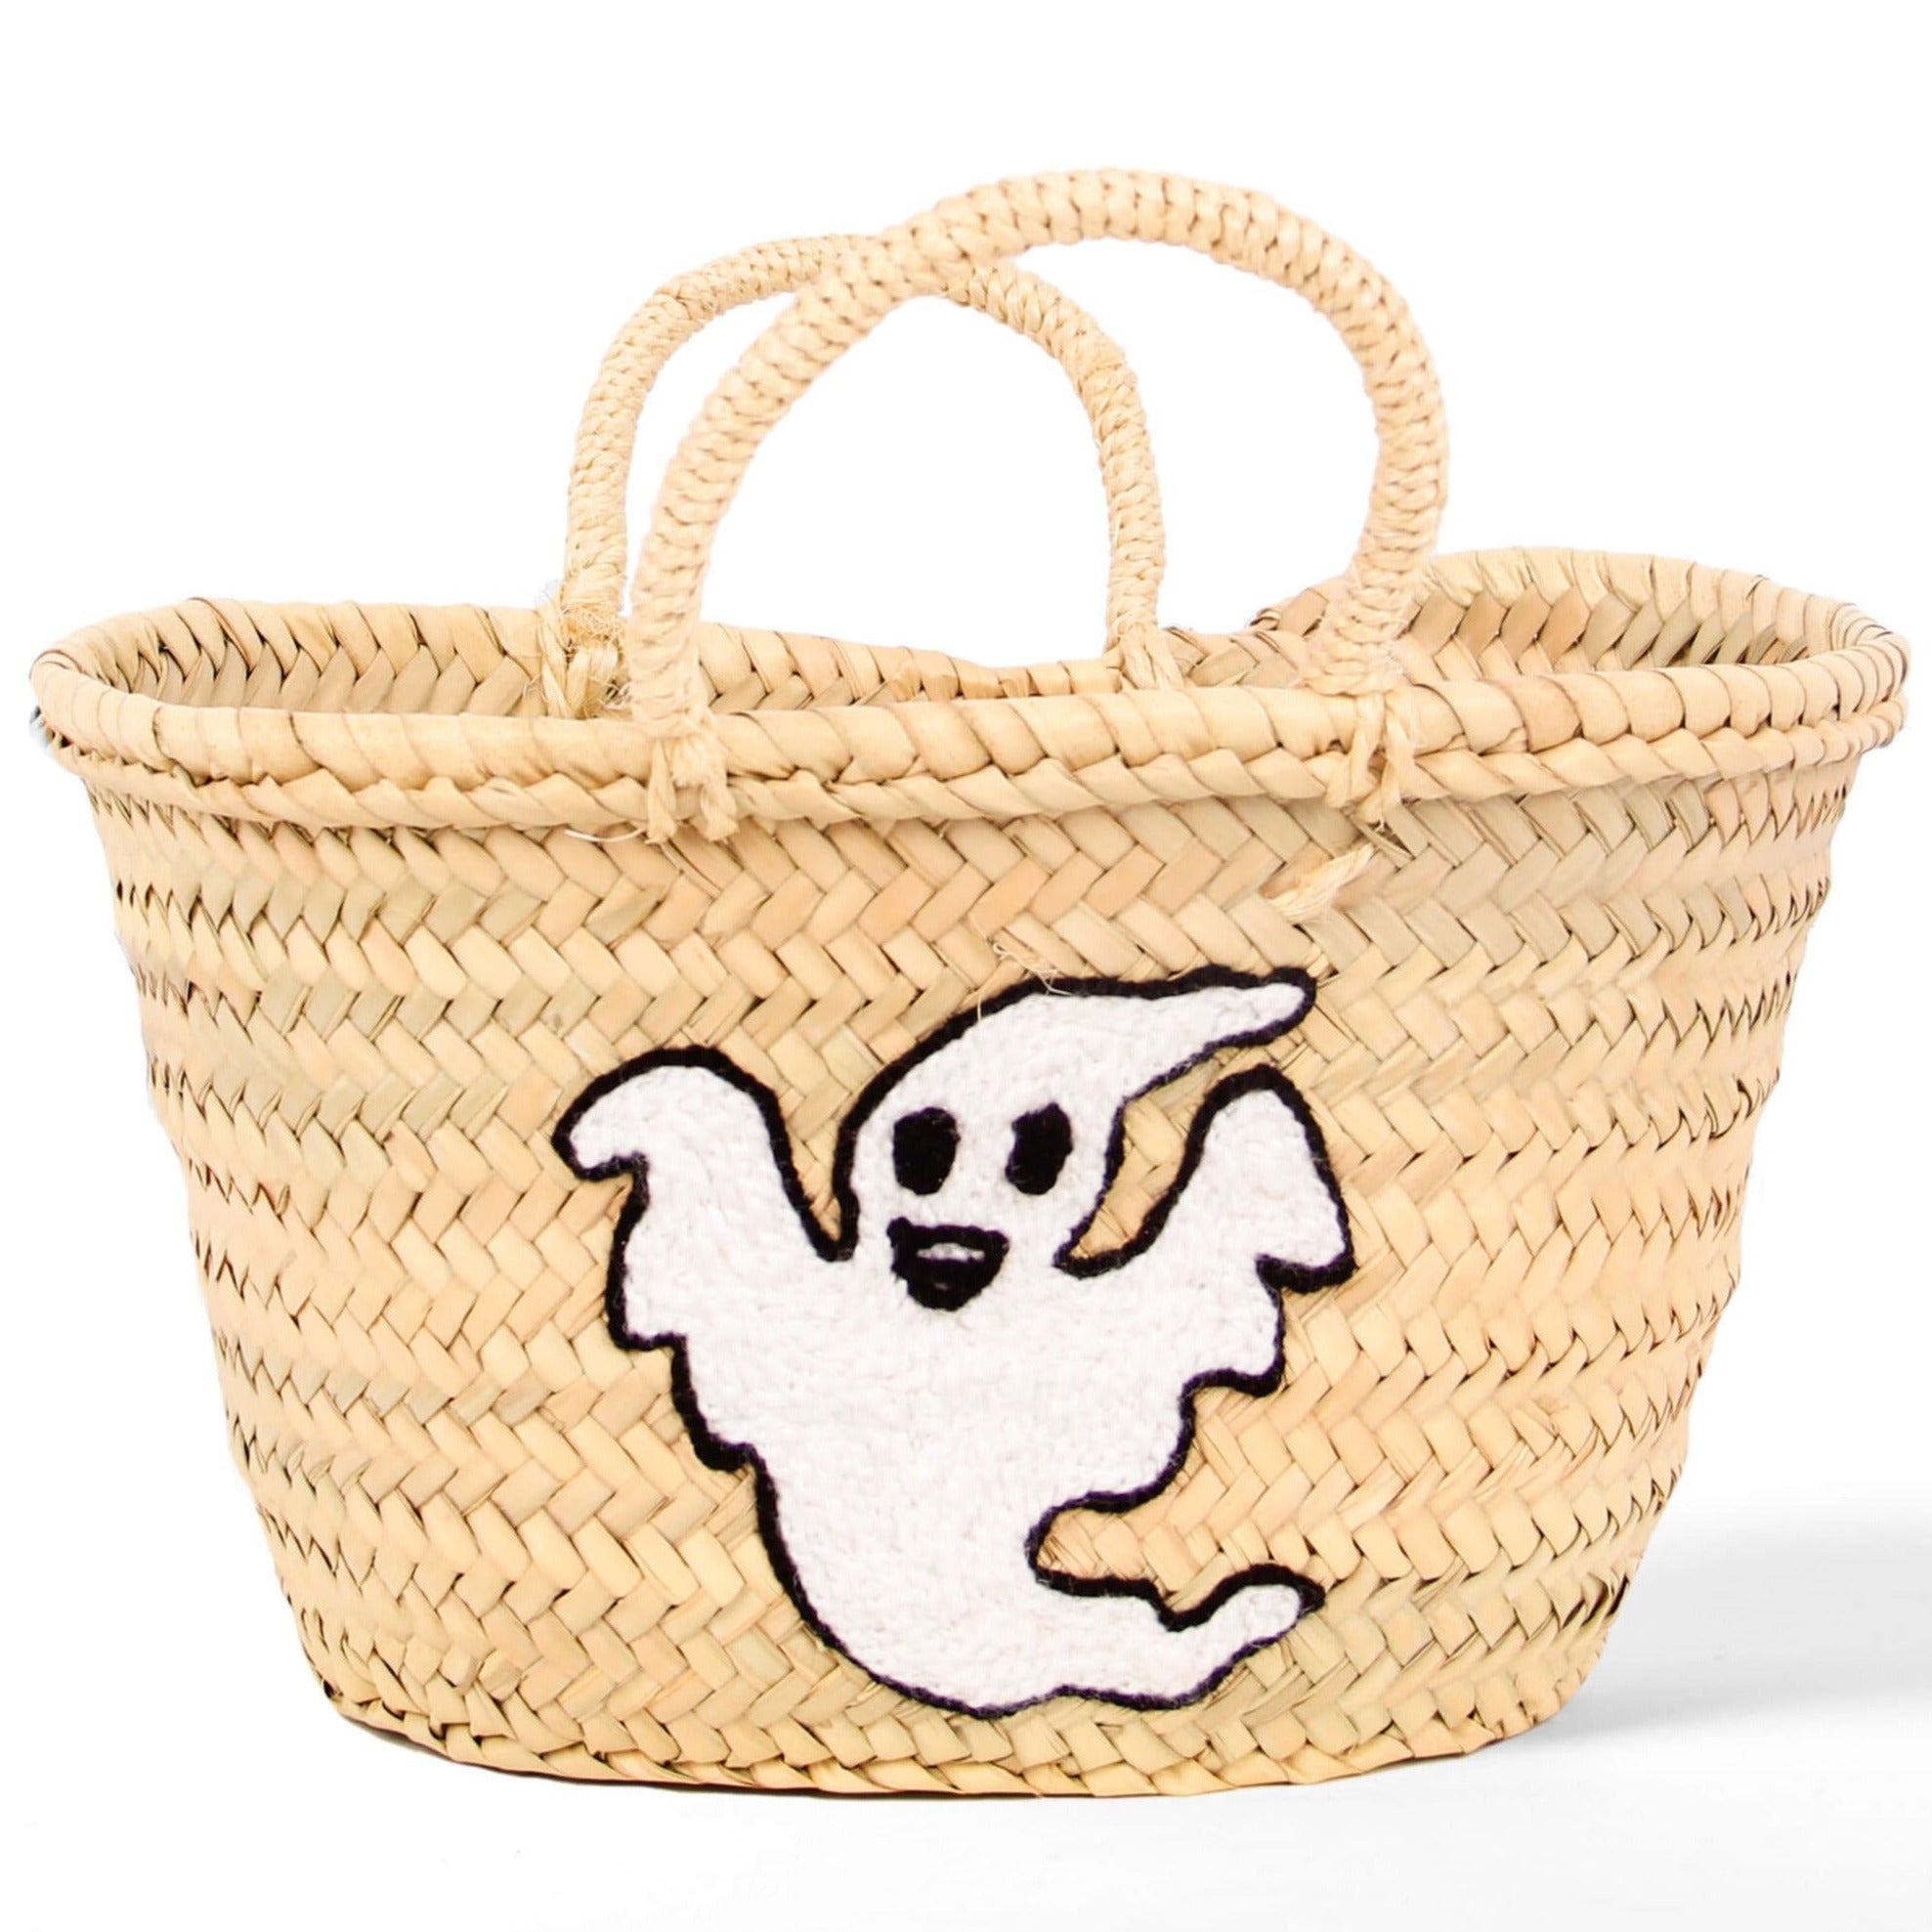 Personalized Candy Tote Bag - Boo!